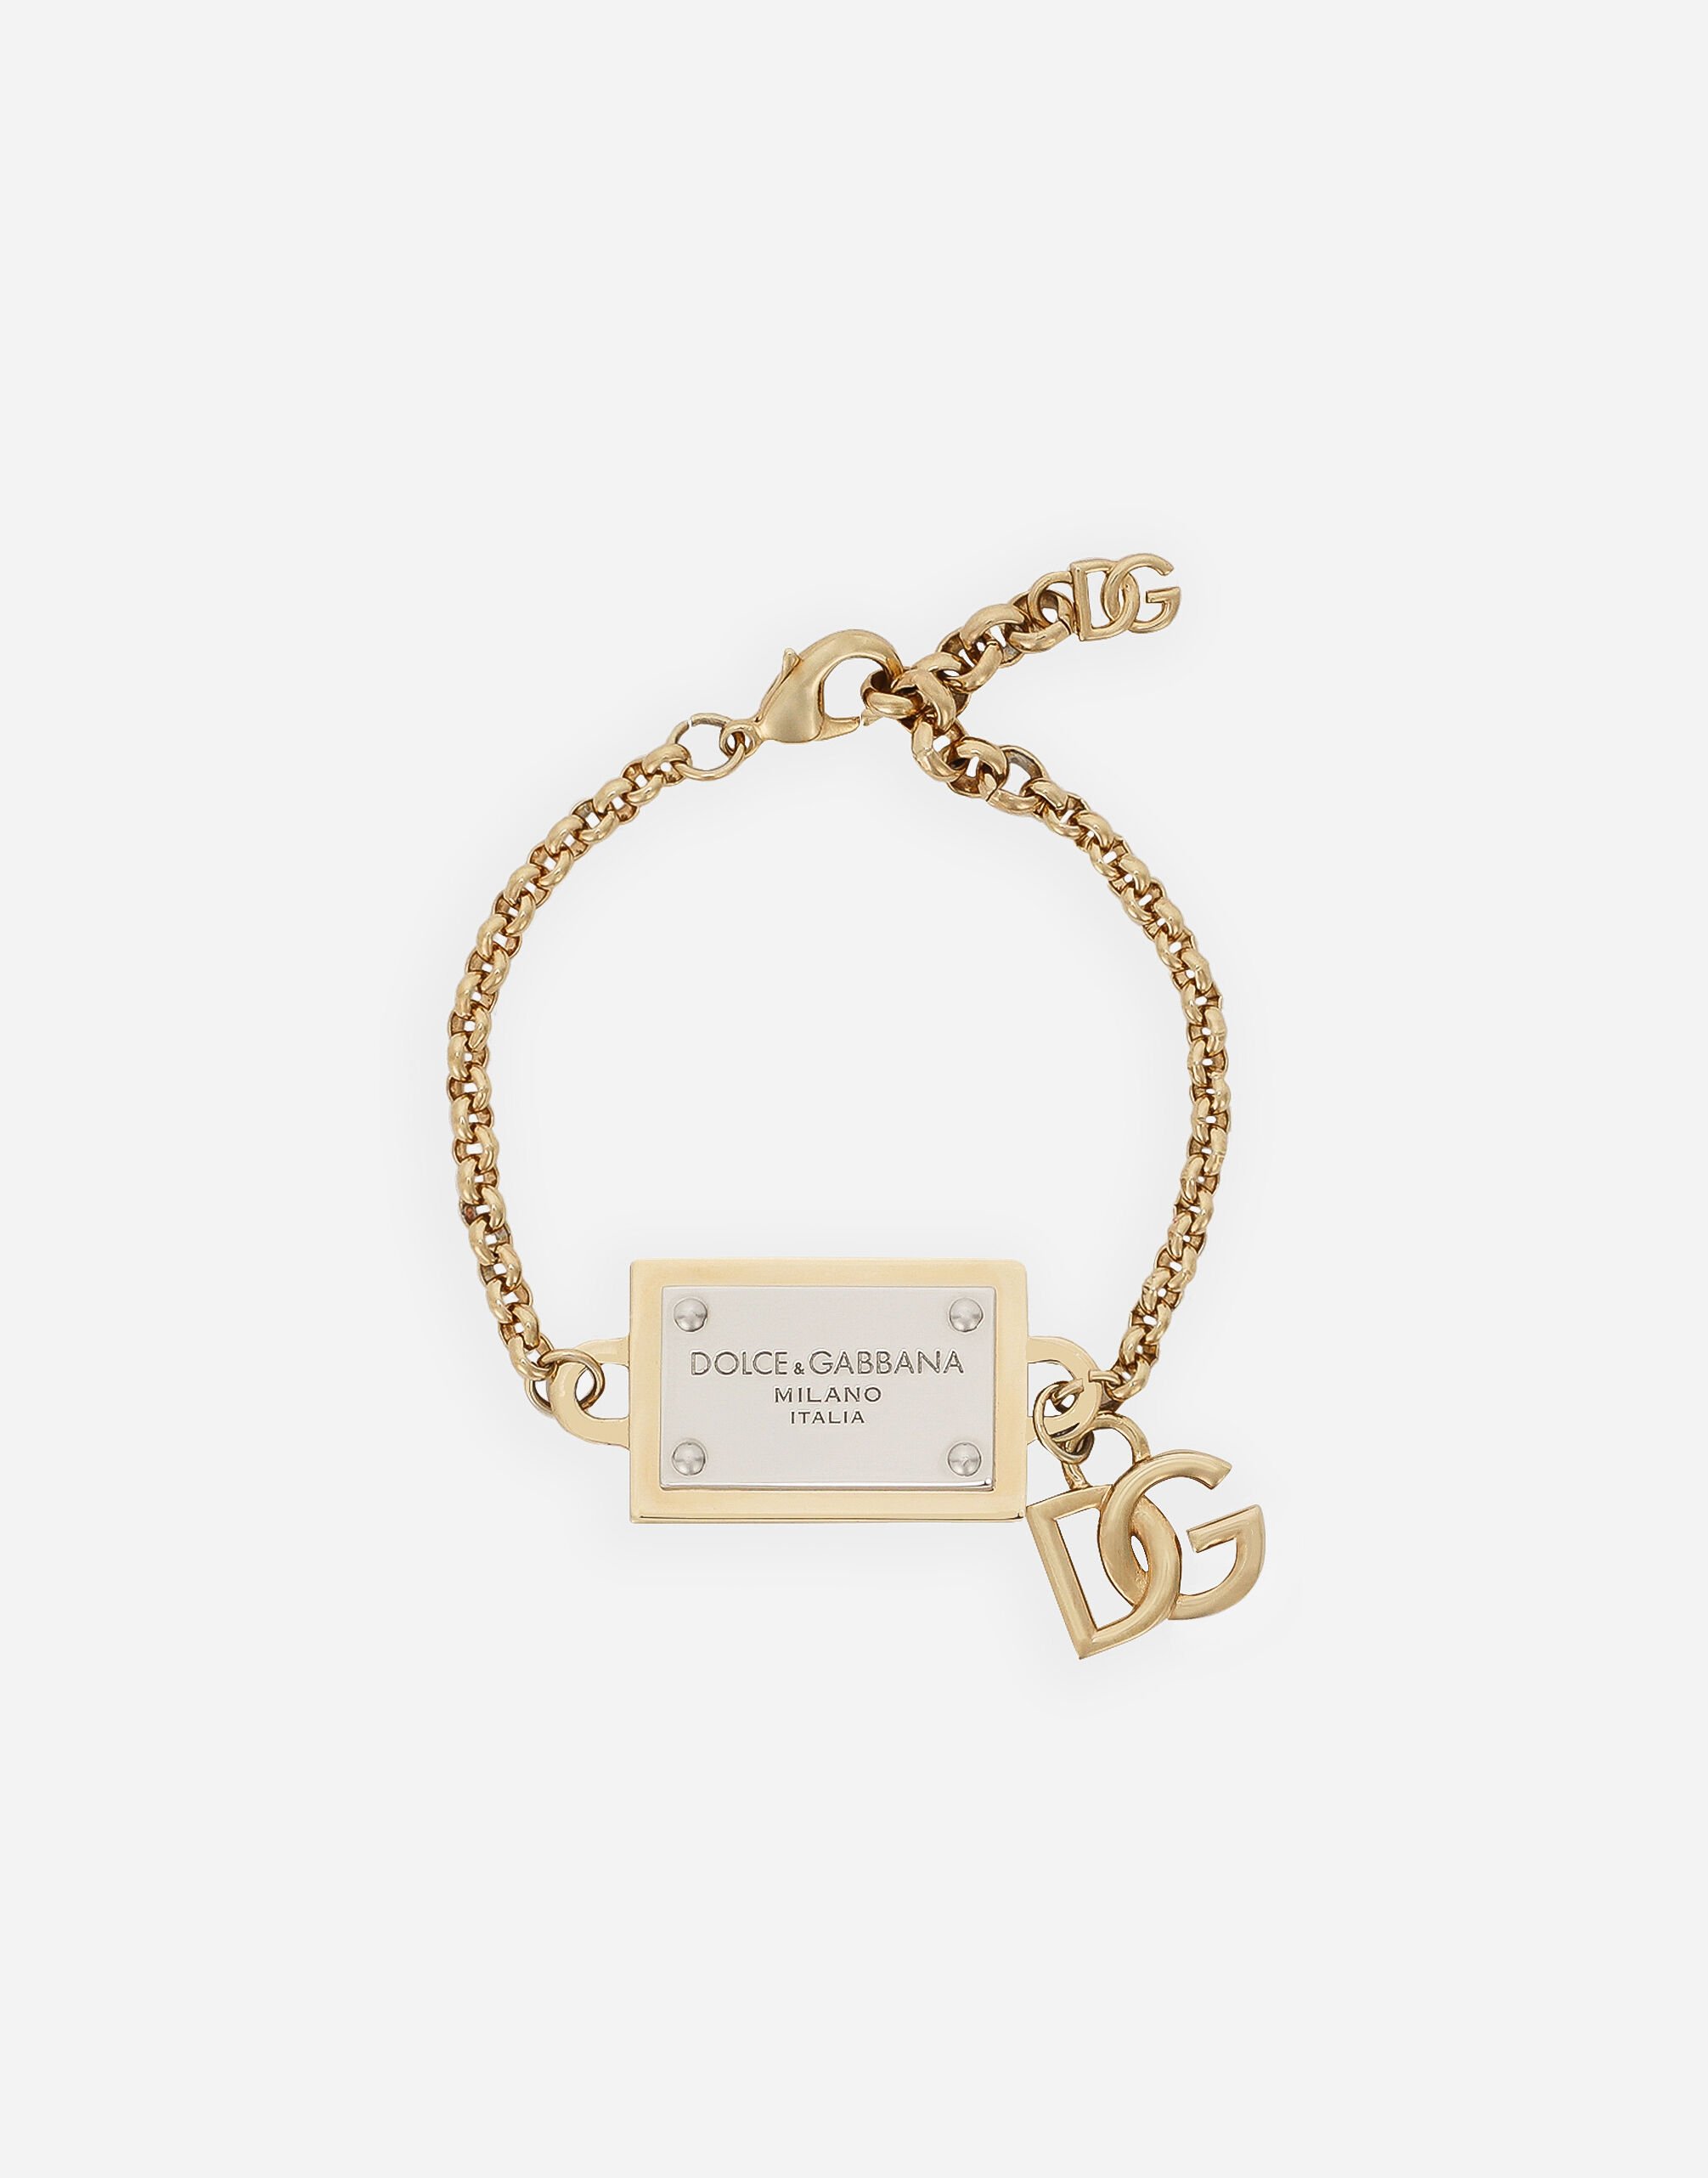 Dolce & Gabbana Bracelet with DG and logo tag Gold BB7287AY828